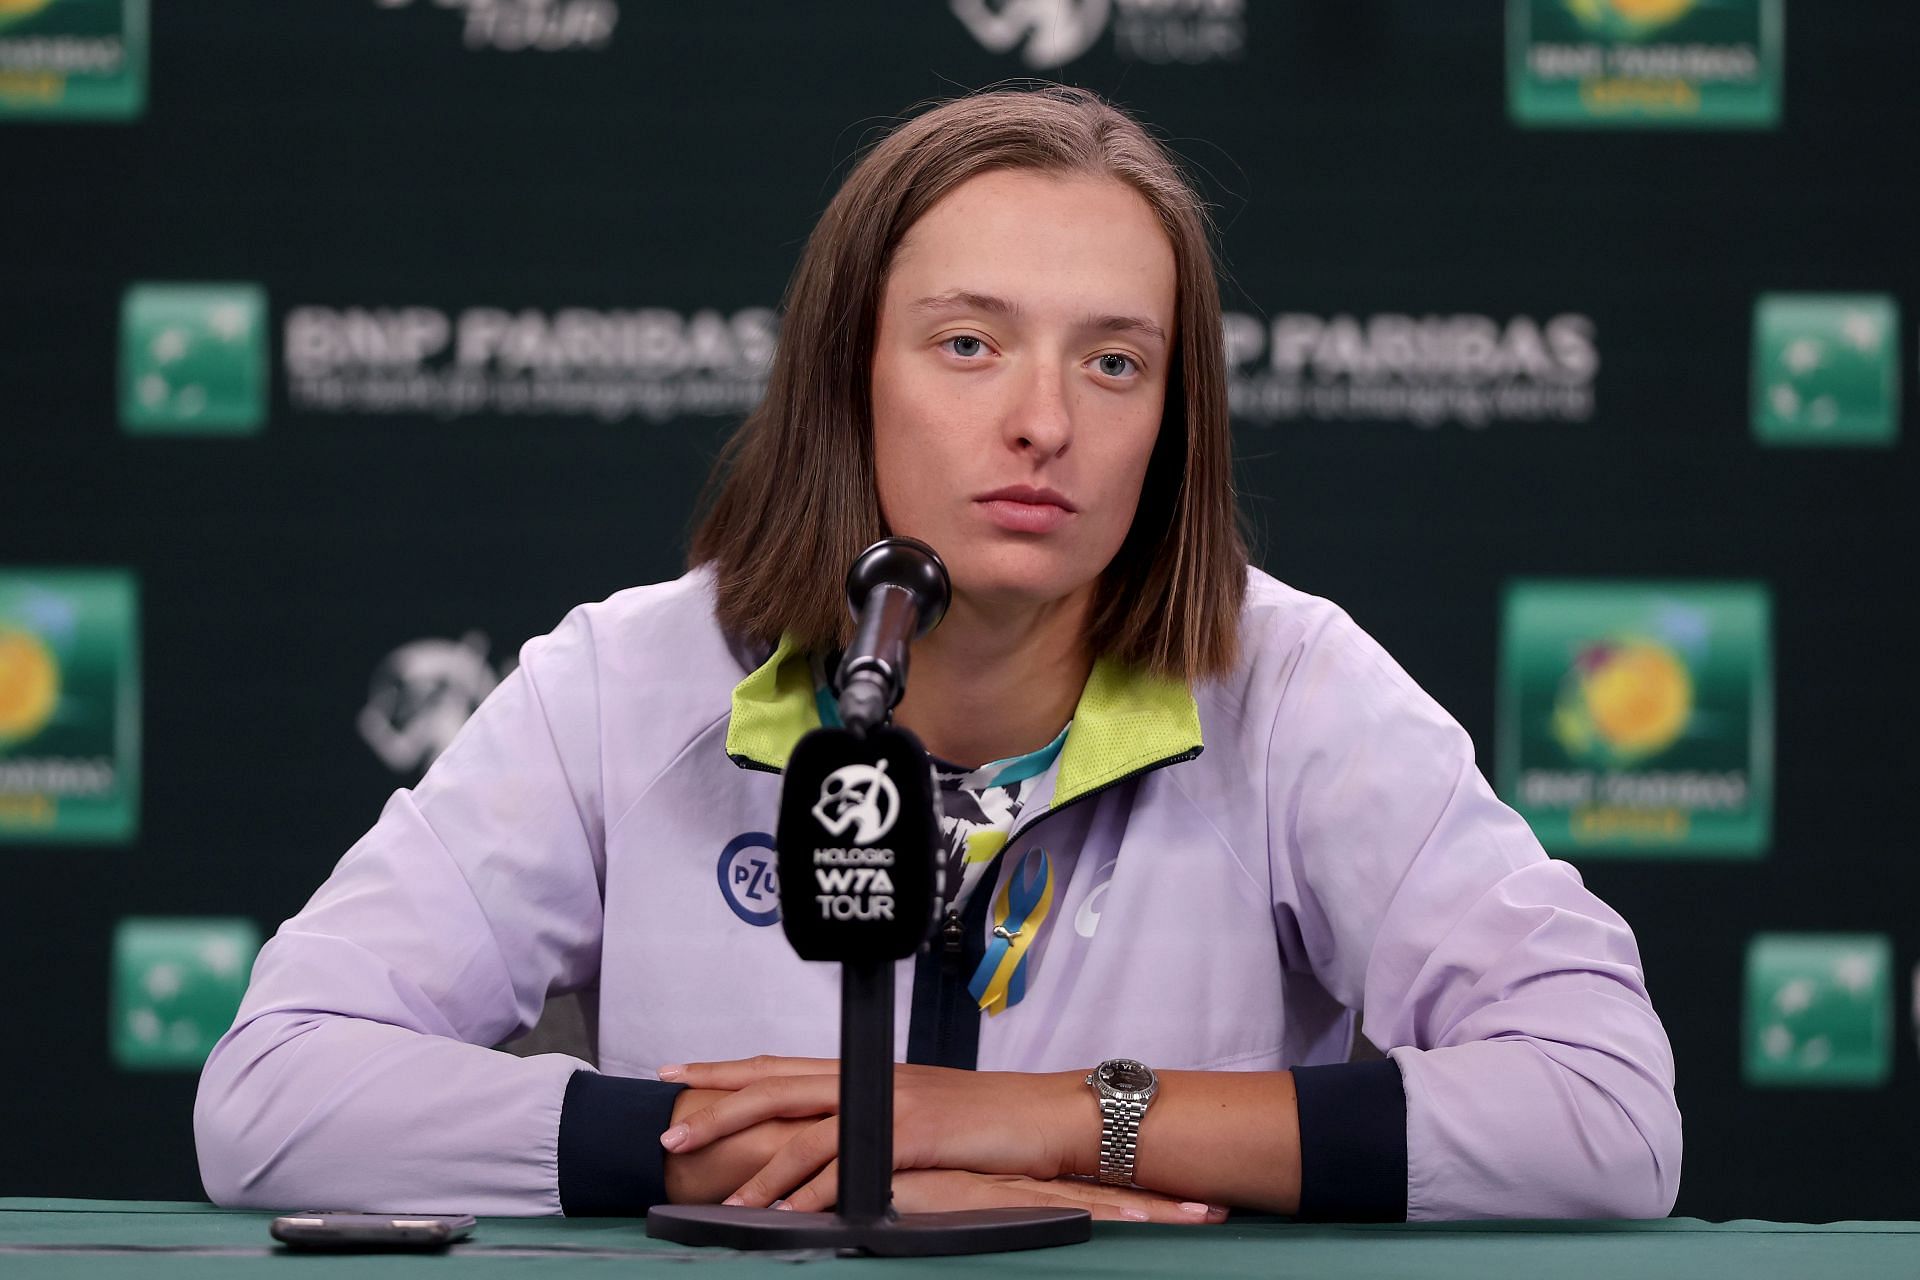 Iga Swiatek with the ribbon at a BNP Paribas Open press conference